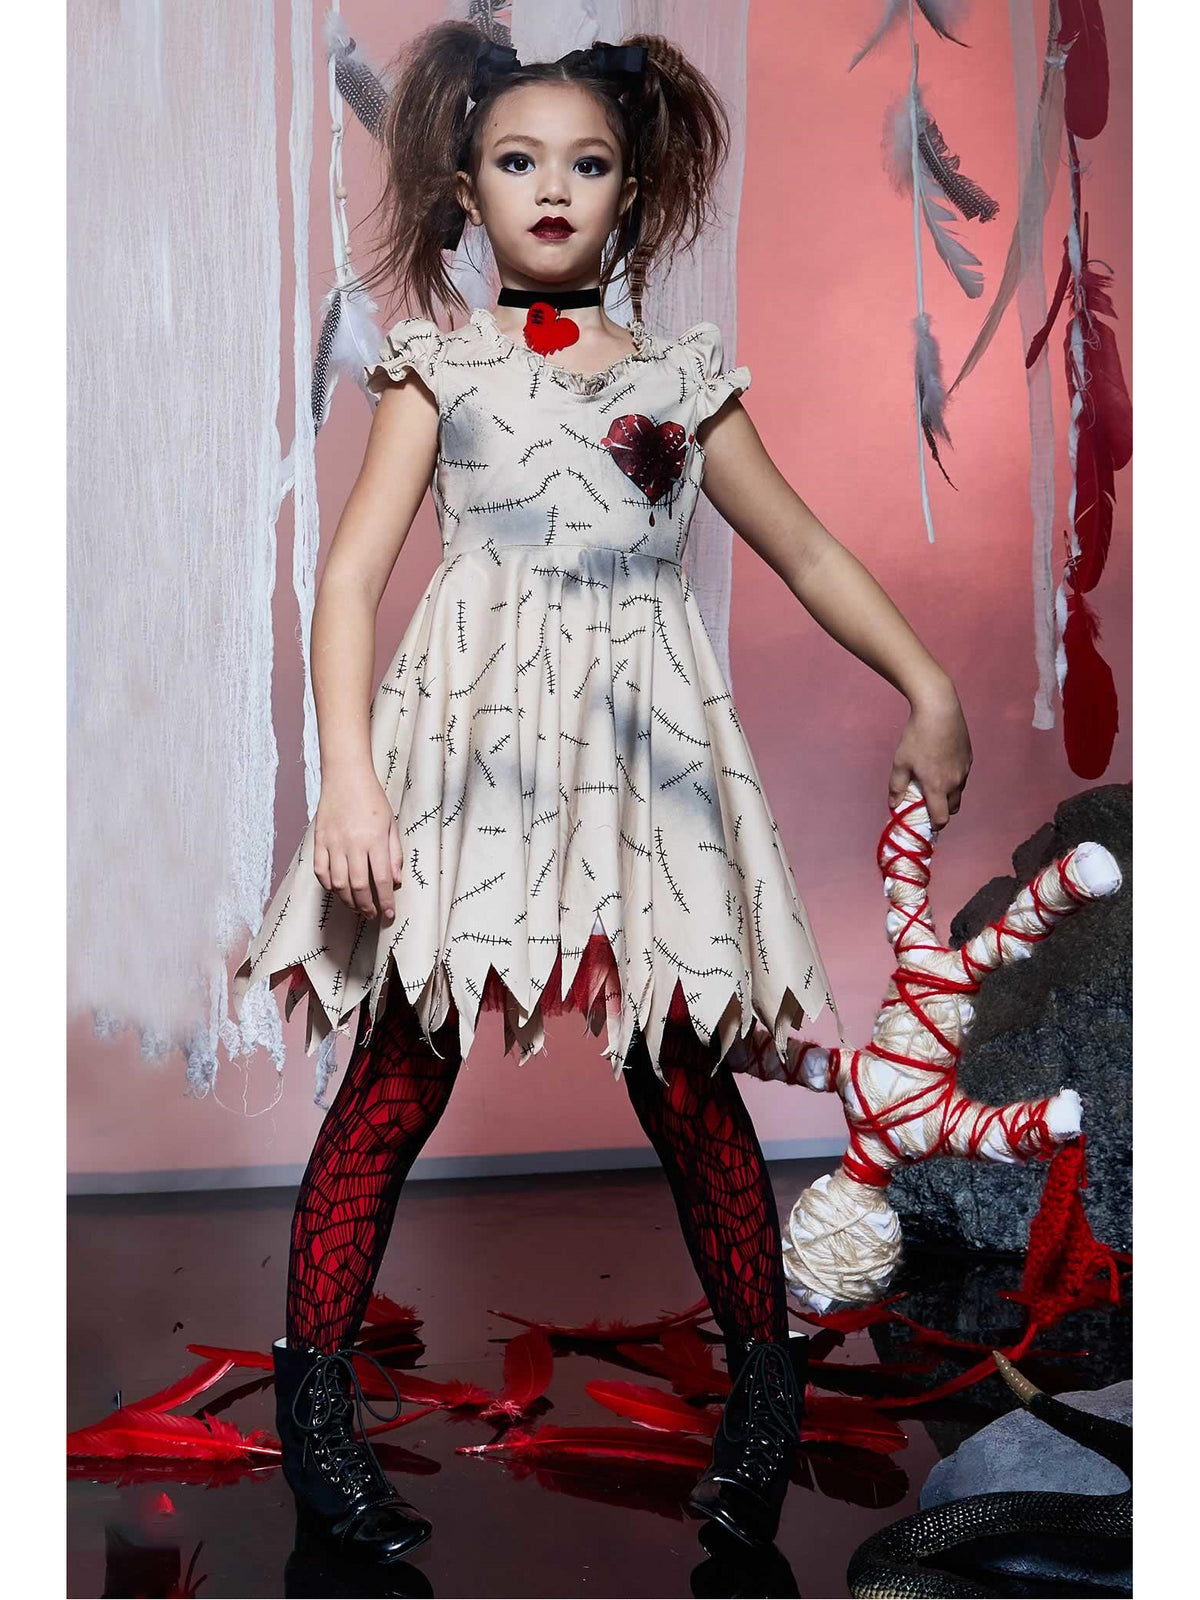 Voodoo Doll Costume for Girls - Chasing Fireflies